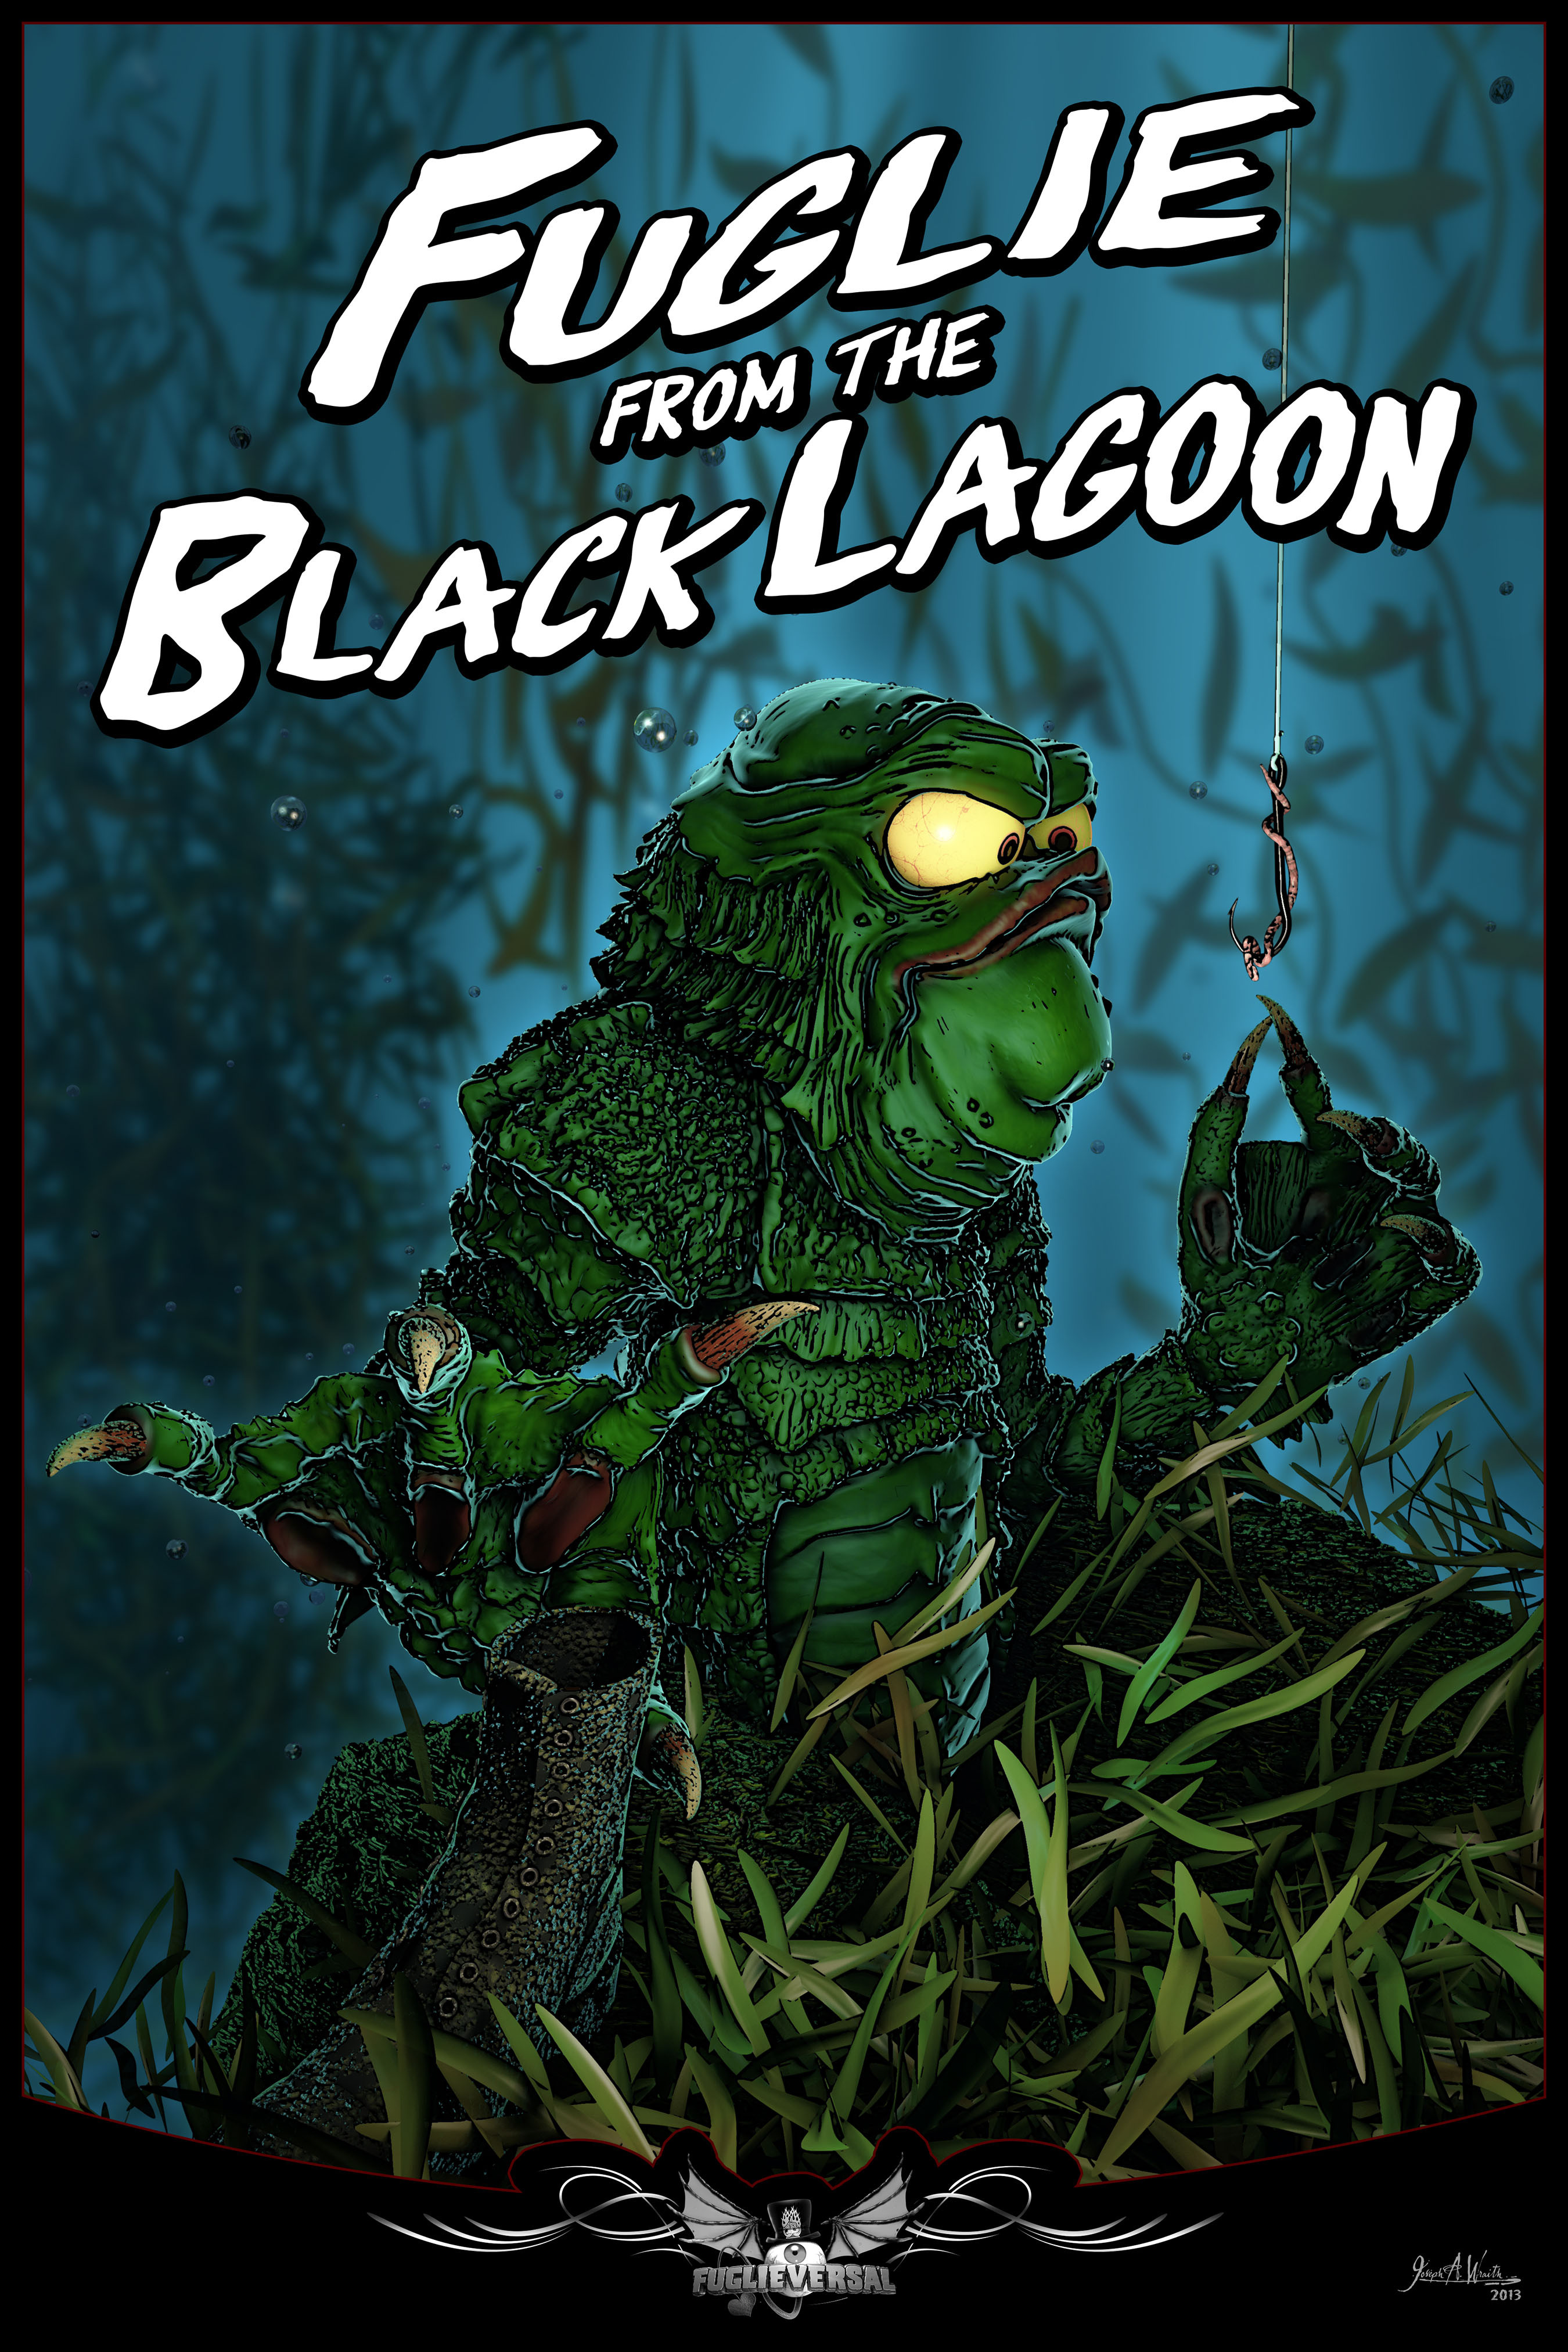 The Fuglies presents Fuglieversal Monsters: The Fuglie from The Black Lagoon
©2014 Copyright, Joseph A. Wraith